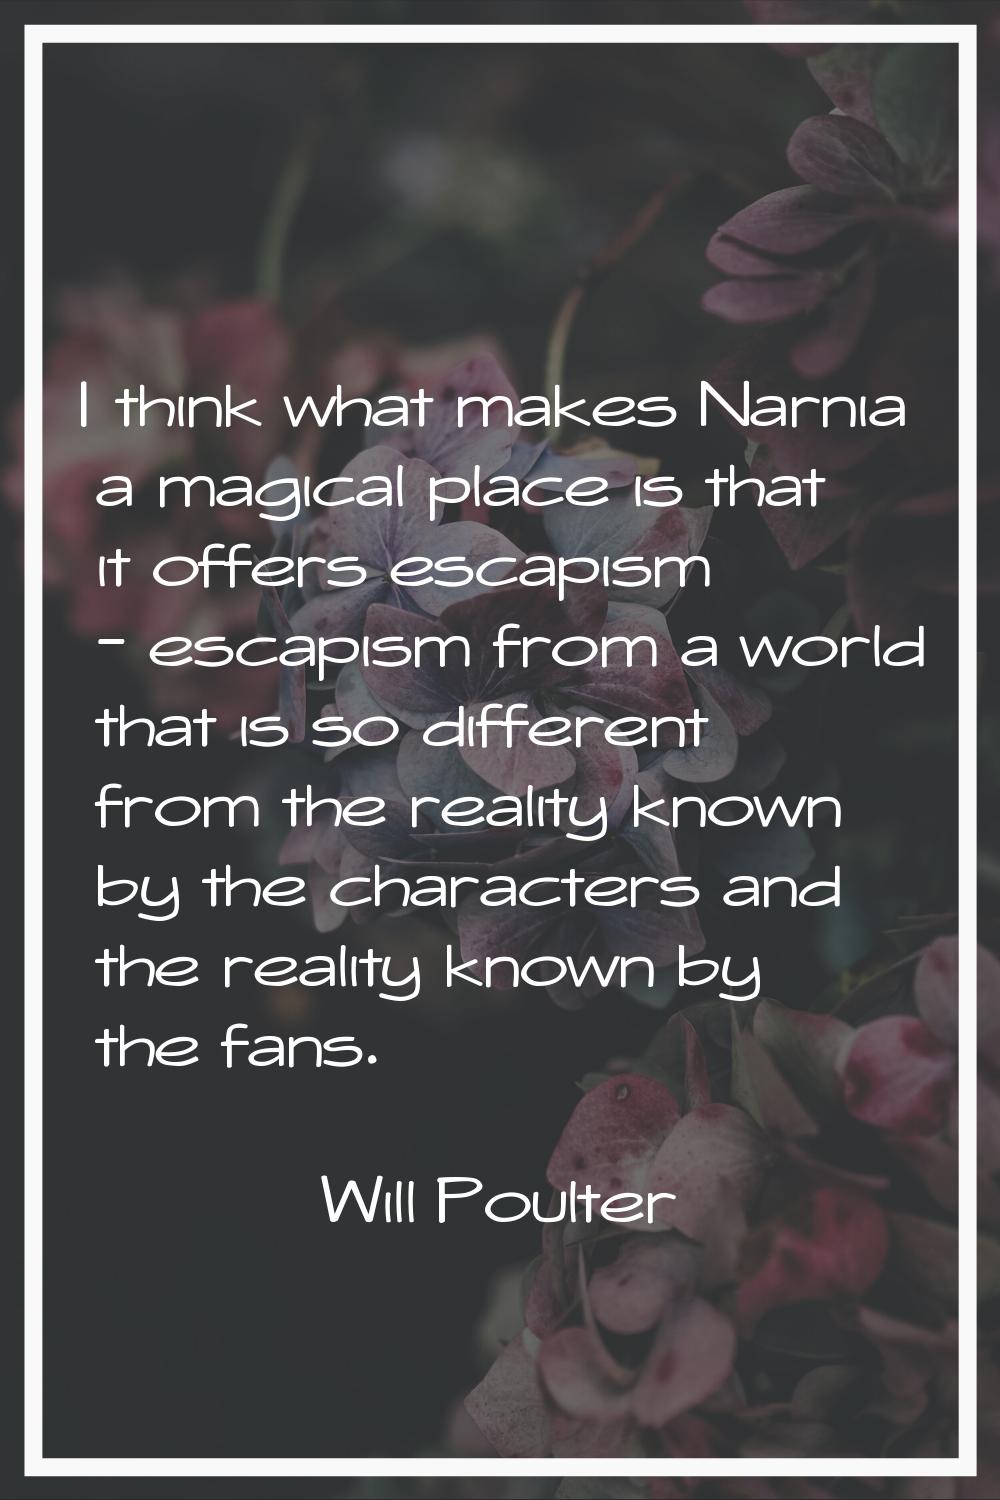 I think what makes Narnia a magical place is that it offers escapism - escapism from a world that i